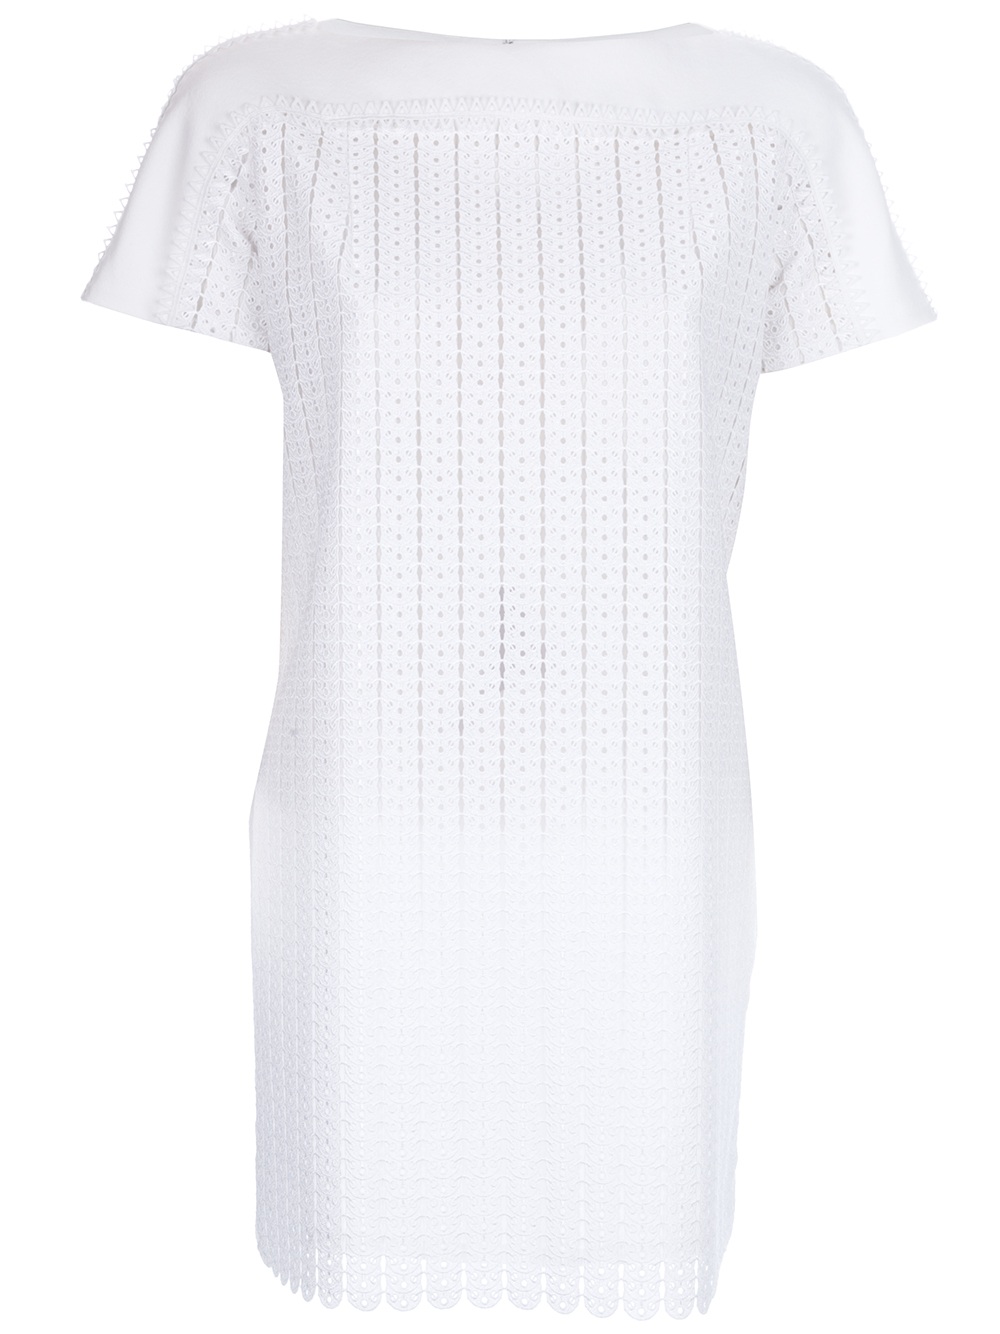 Paco Rabanne Lace Textured Dress in White | Lyst